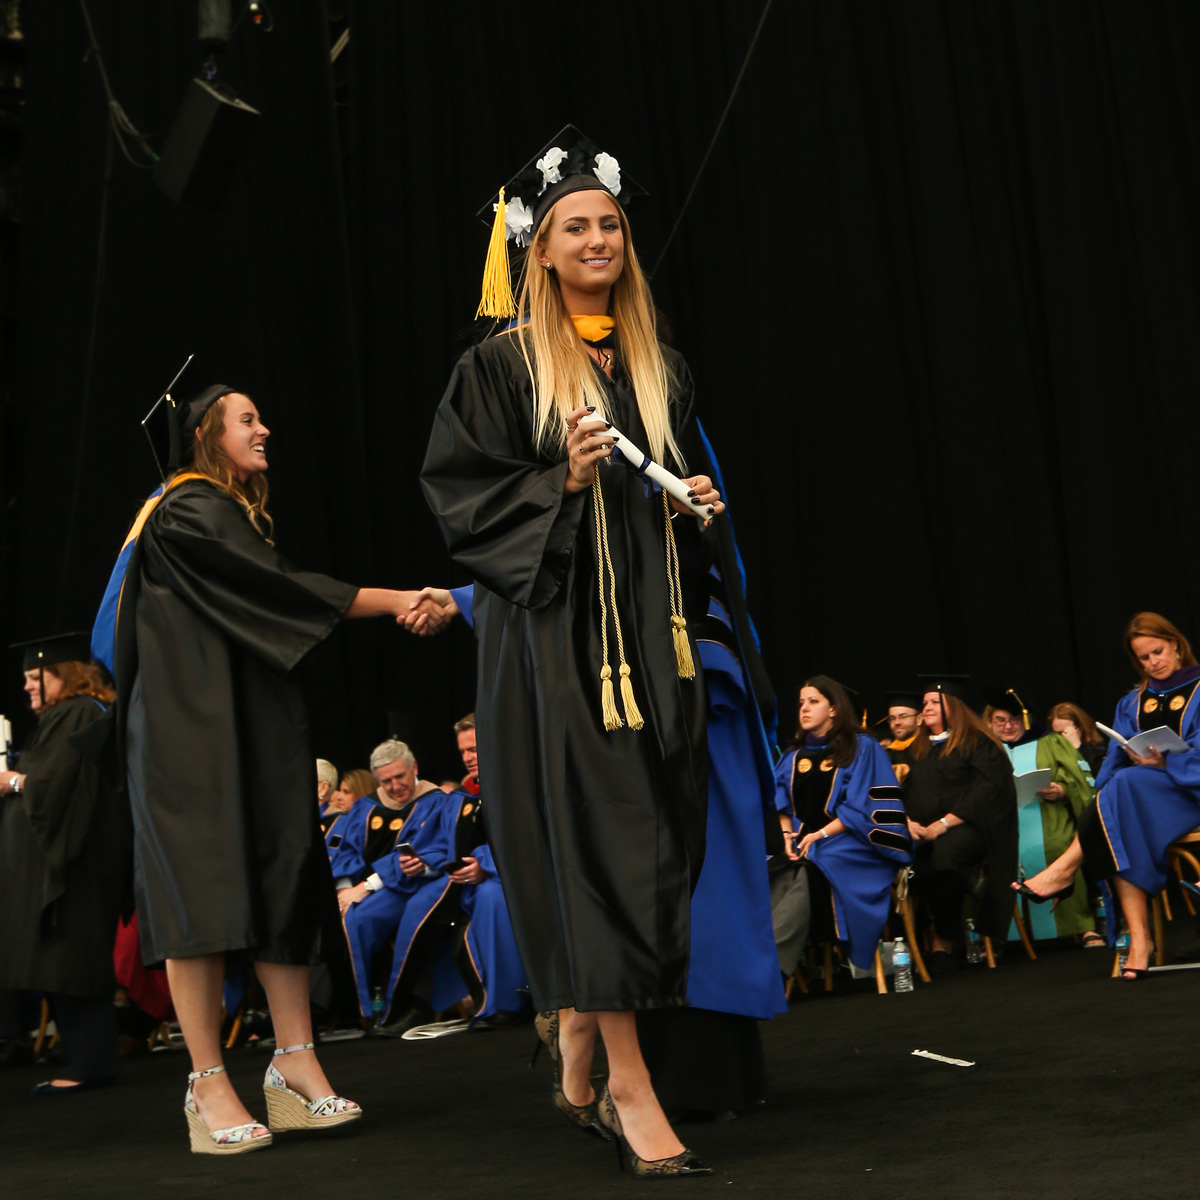 Casey Parker smiling for the camera while crossing stage in her cap and gown during Commencement.